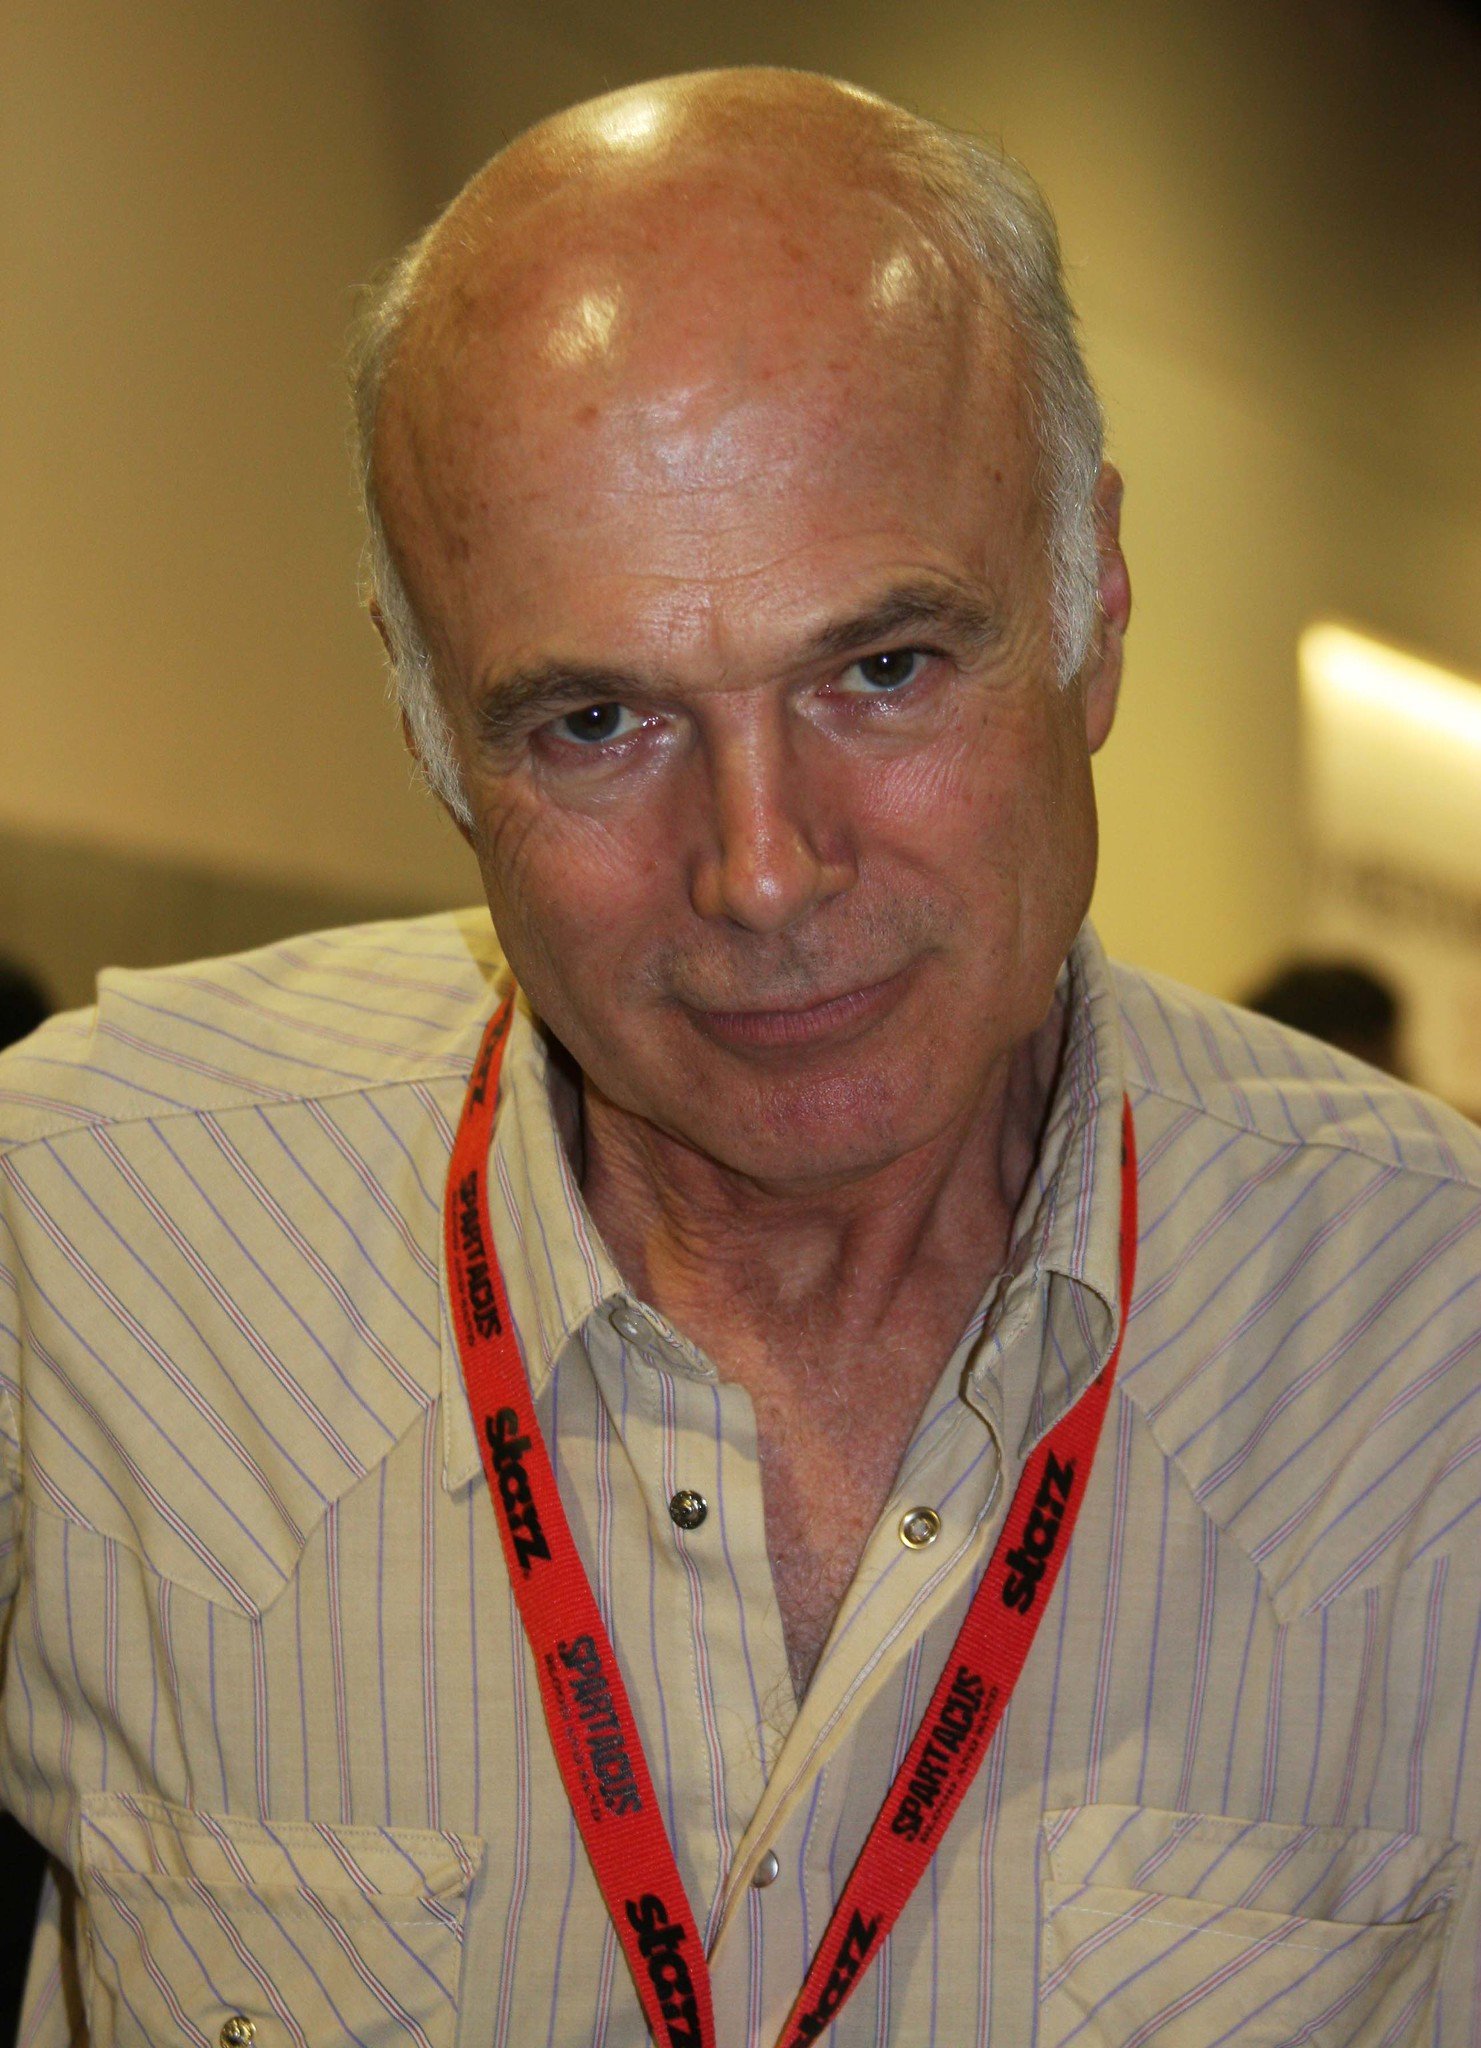 Michael Hogan who plays Colonel Saul Tigh on "Battlestar Galactica" photographed on July 26, 2009 | Photo: Flickr/tinyfroglet